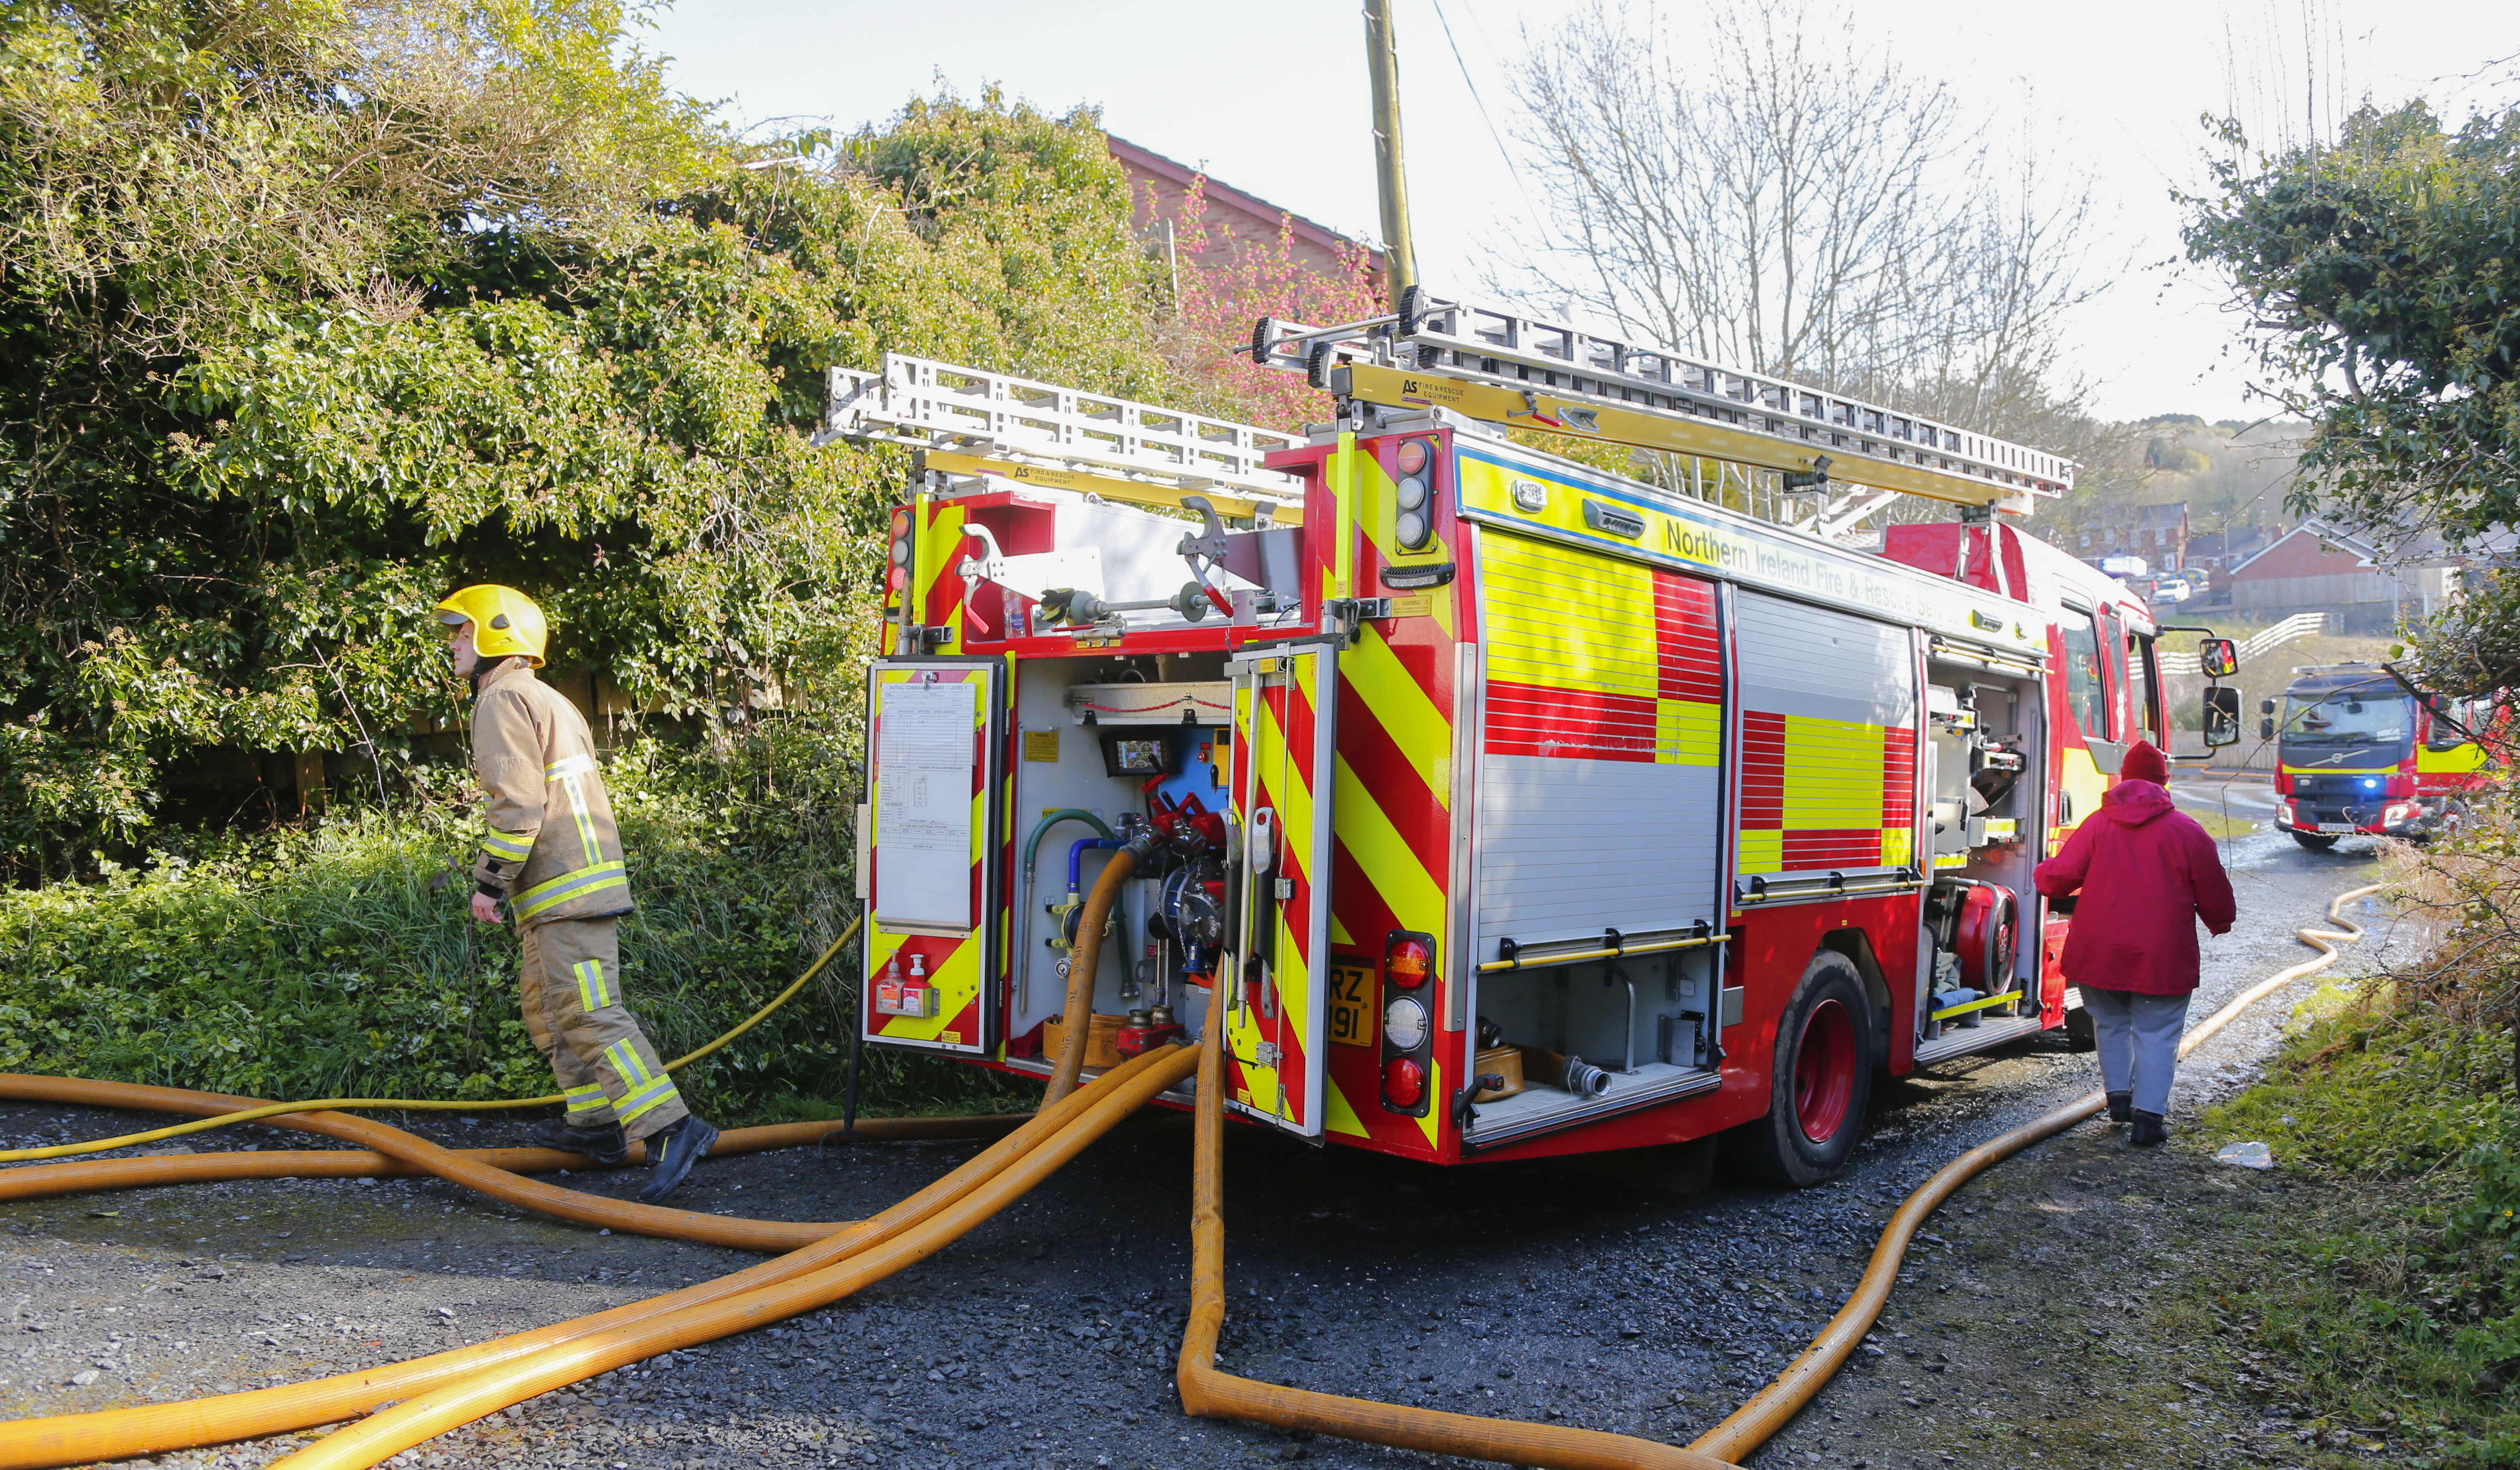 The scene of the arson attack on a property in Ligoniel